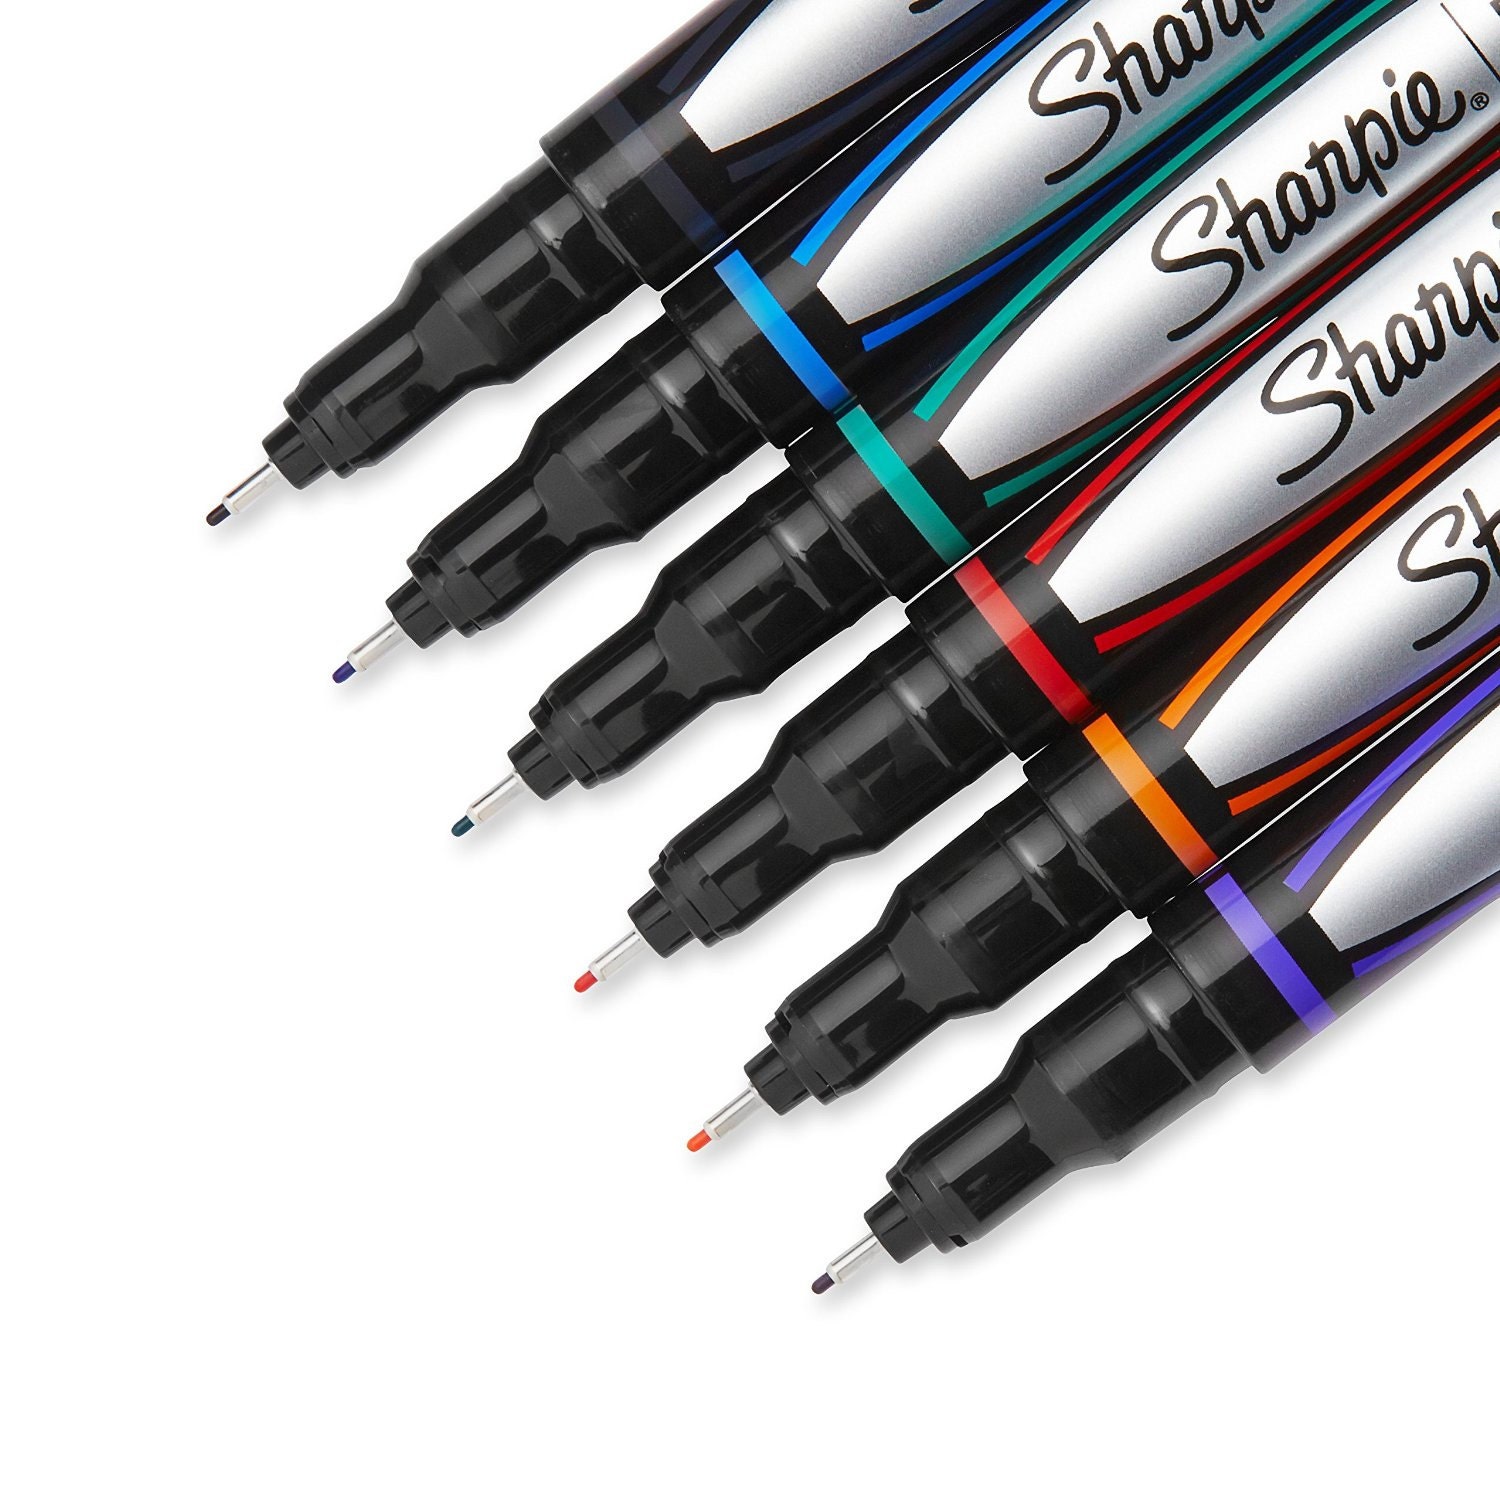 Buy 6 Writing, Calligraphy Sharpie Fine Point Tip Pen, Stylo, 6